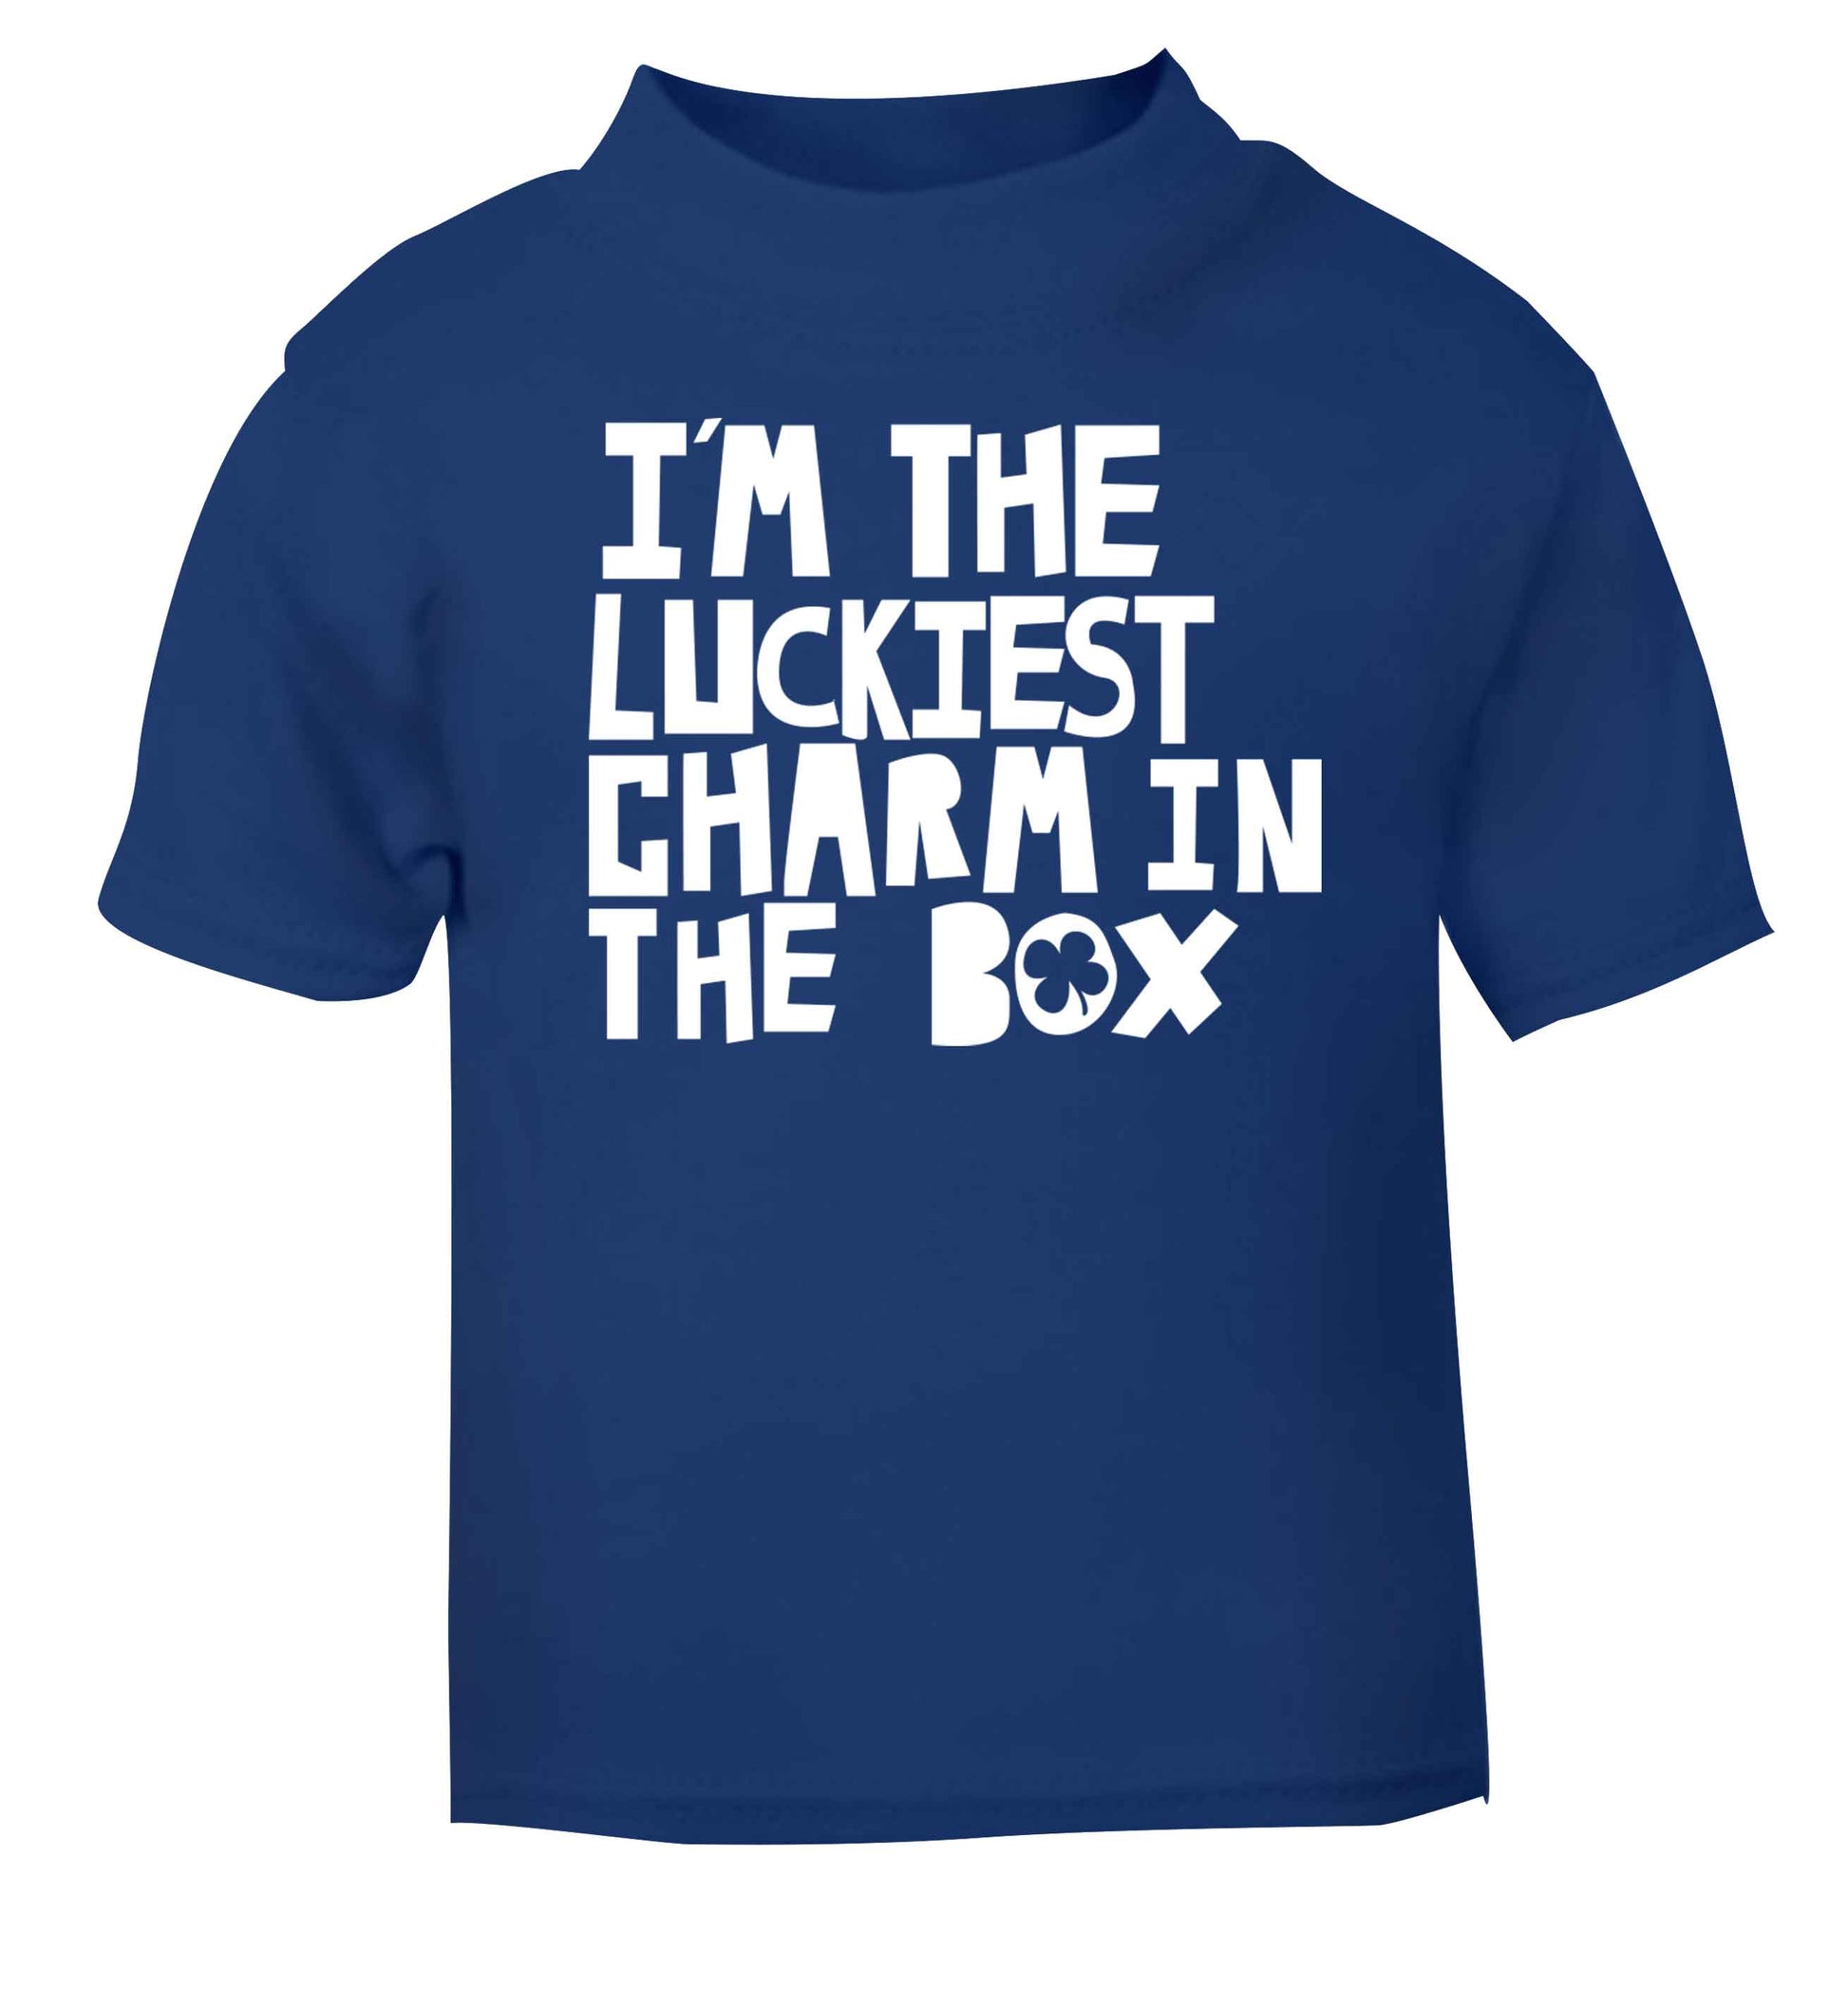 I'm the luckiest charm in the box blue baby toddler Tshirt 2 Years